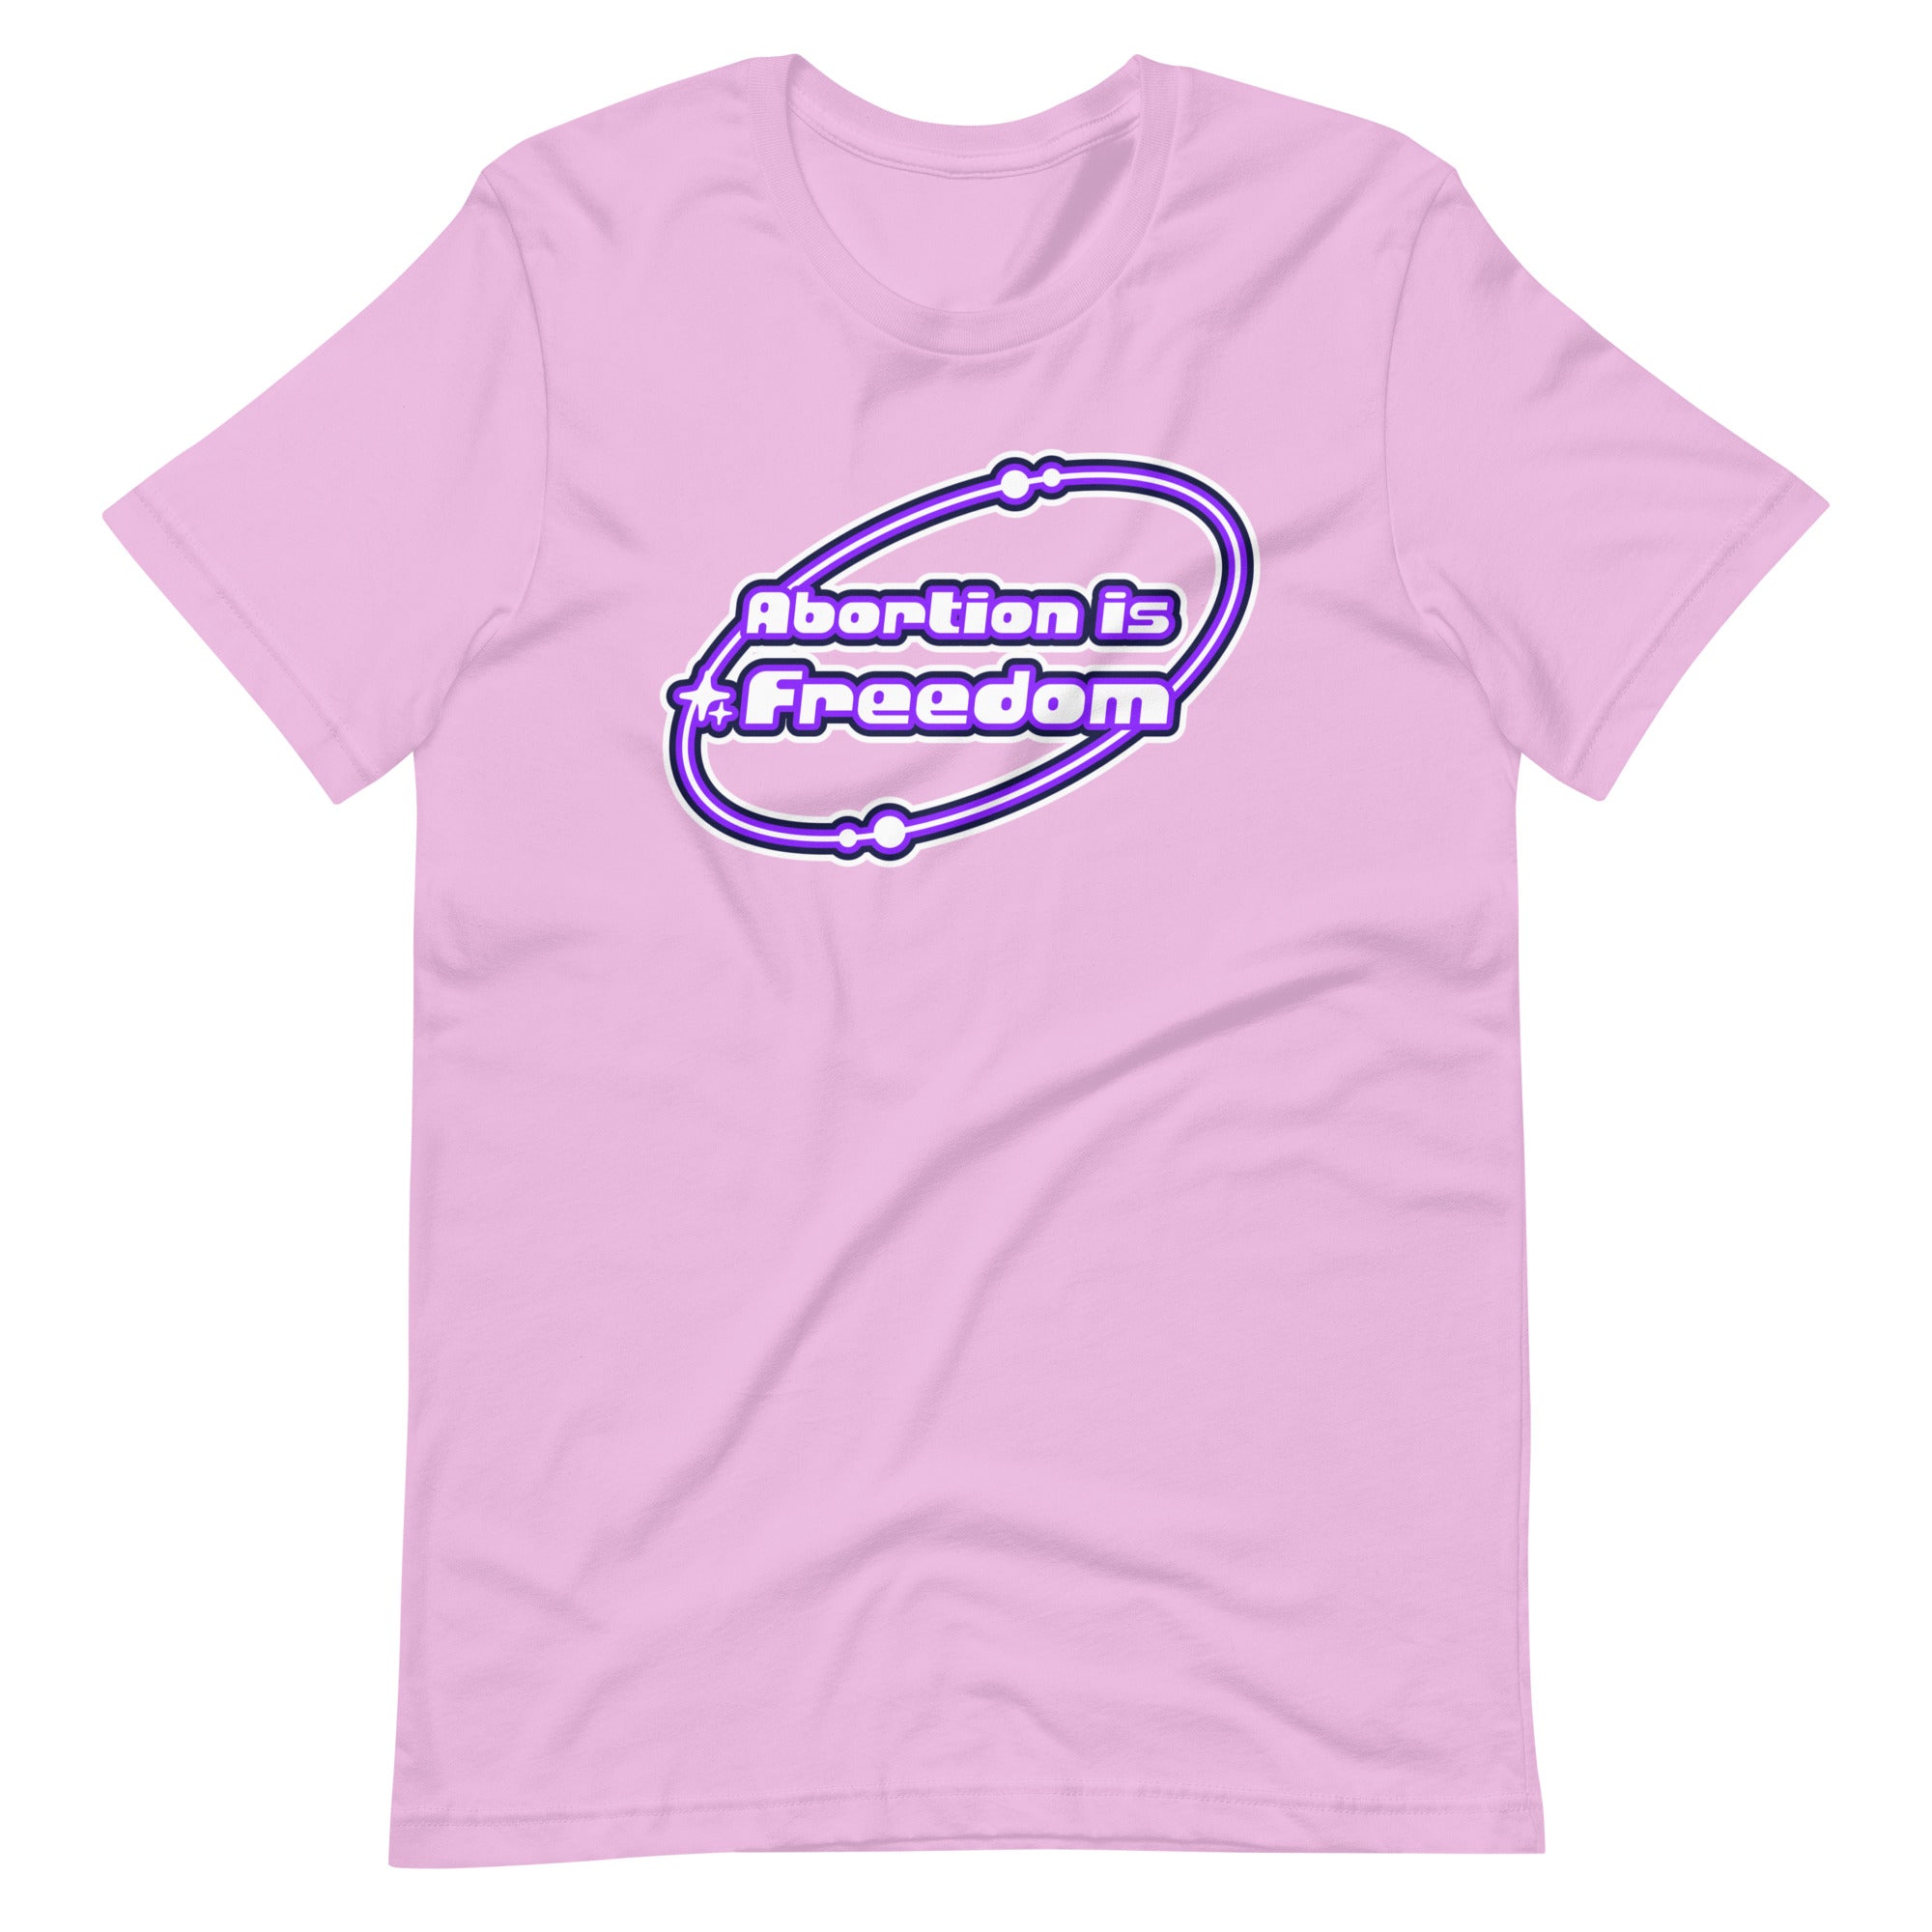 Abortion Is Freedom Unisex Feminist T-shirt Shop Women’s Rights T-shirts - Feminist Trash Store - Lilac  